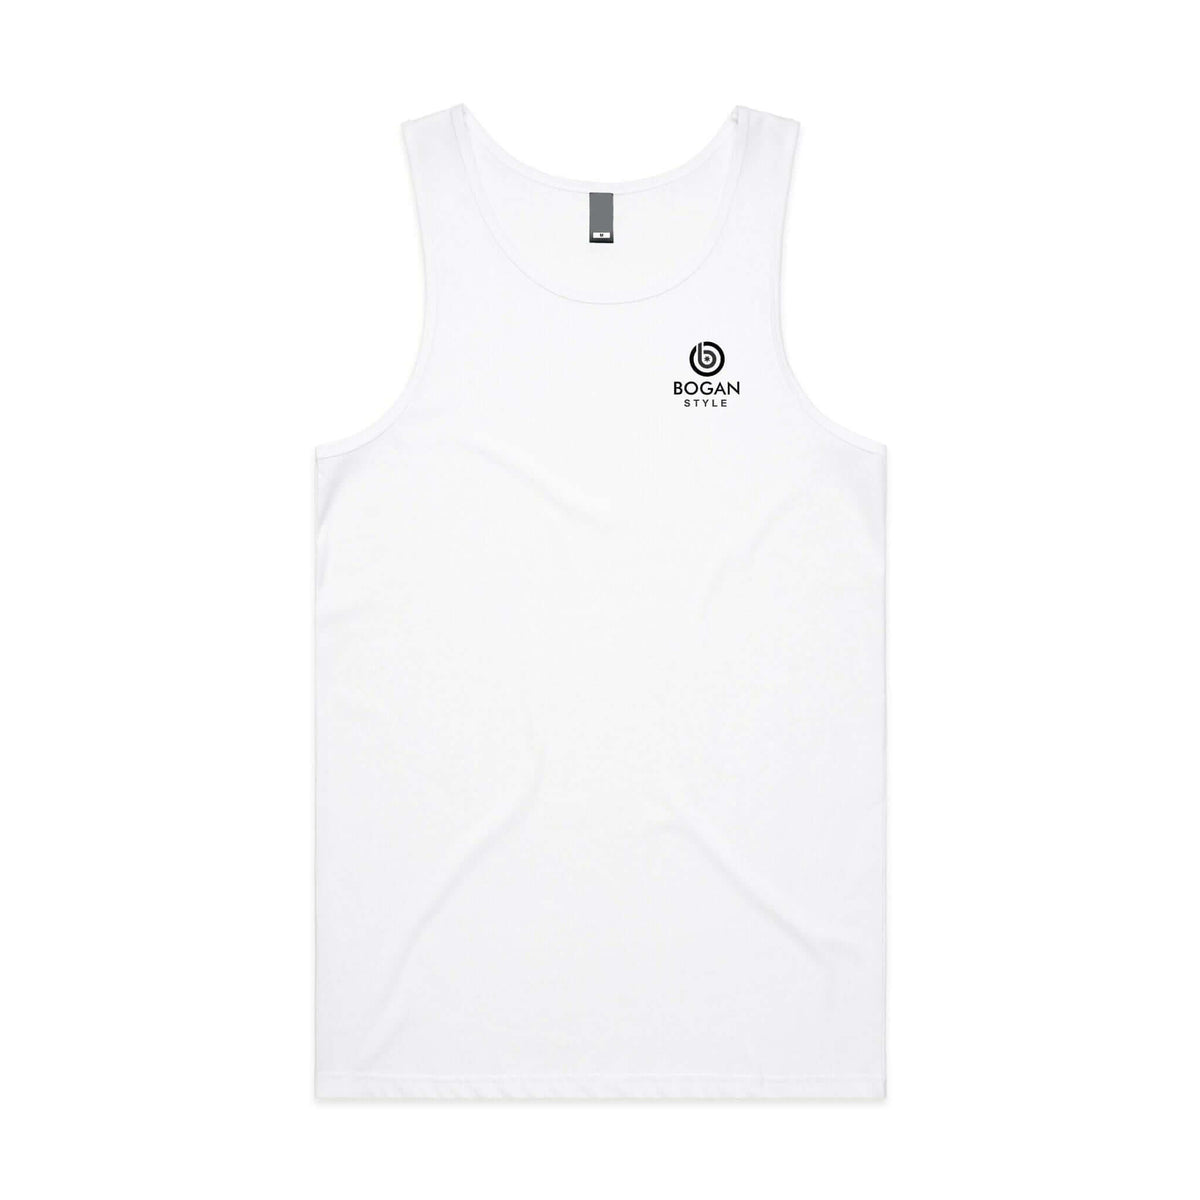 Men's white tank with small Bogan Style logo on chest